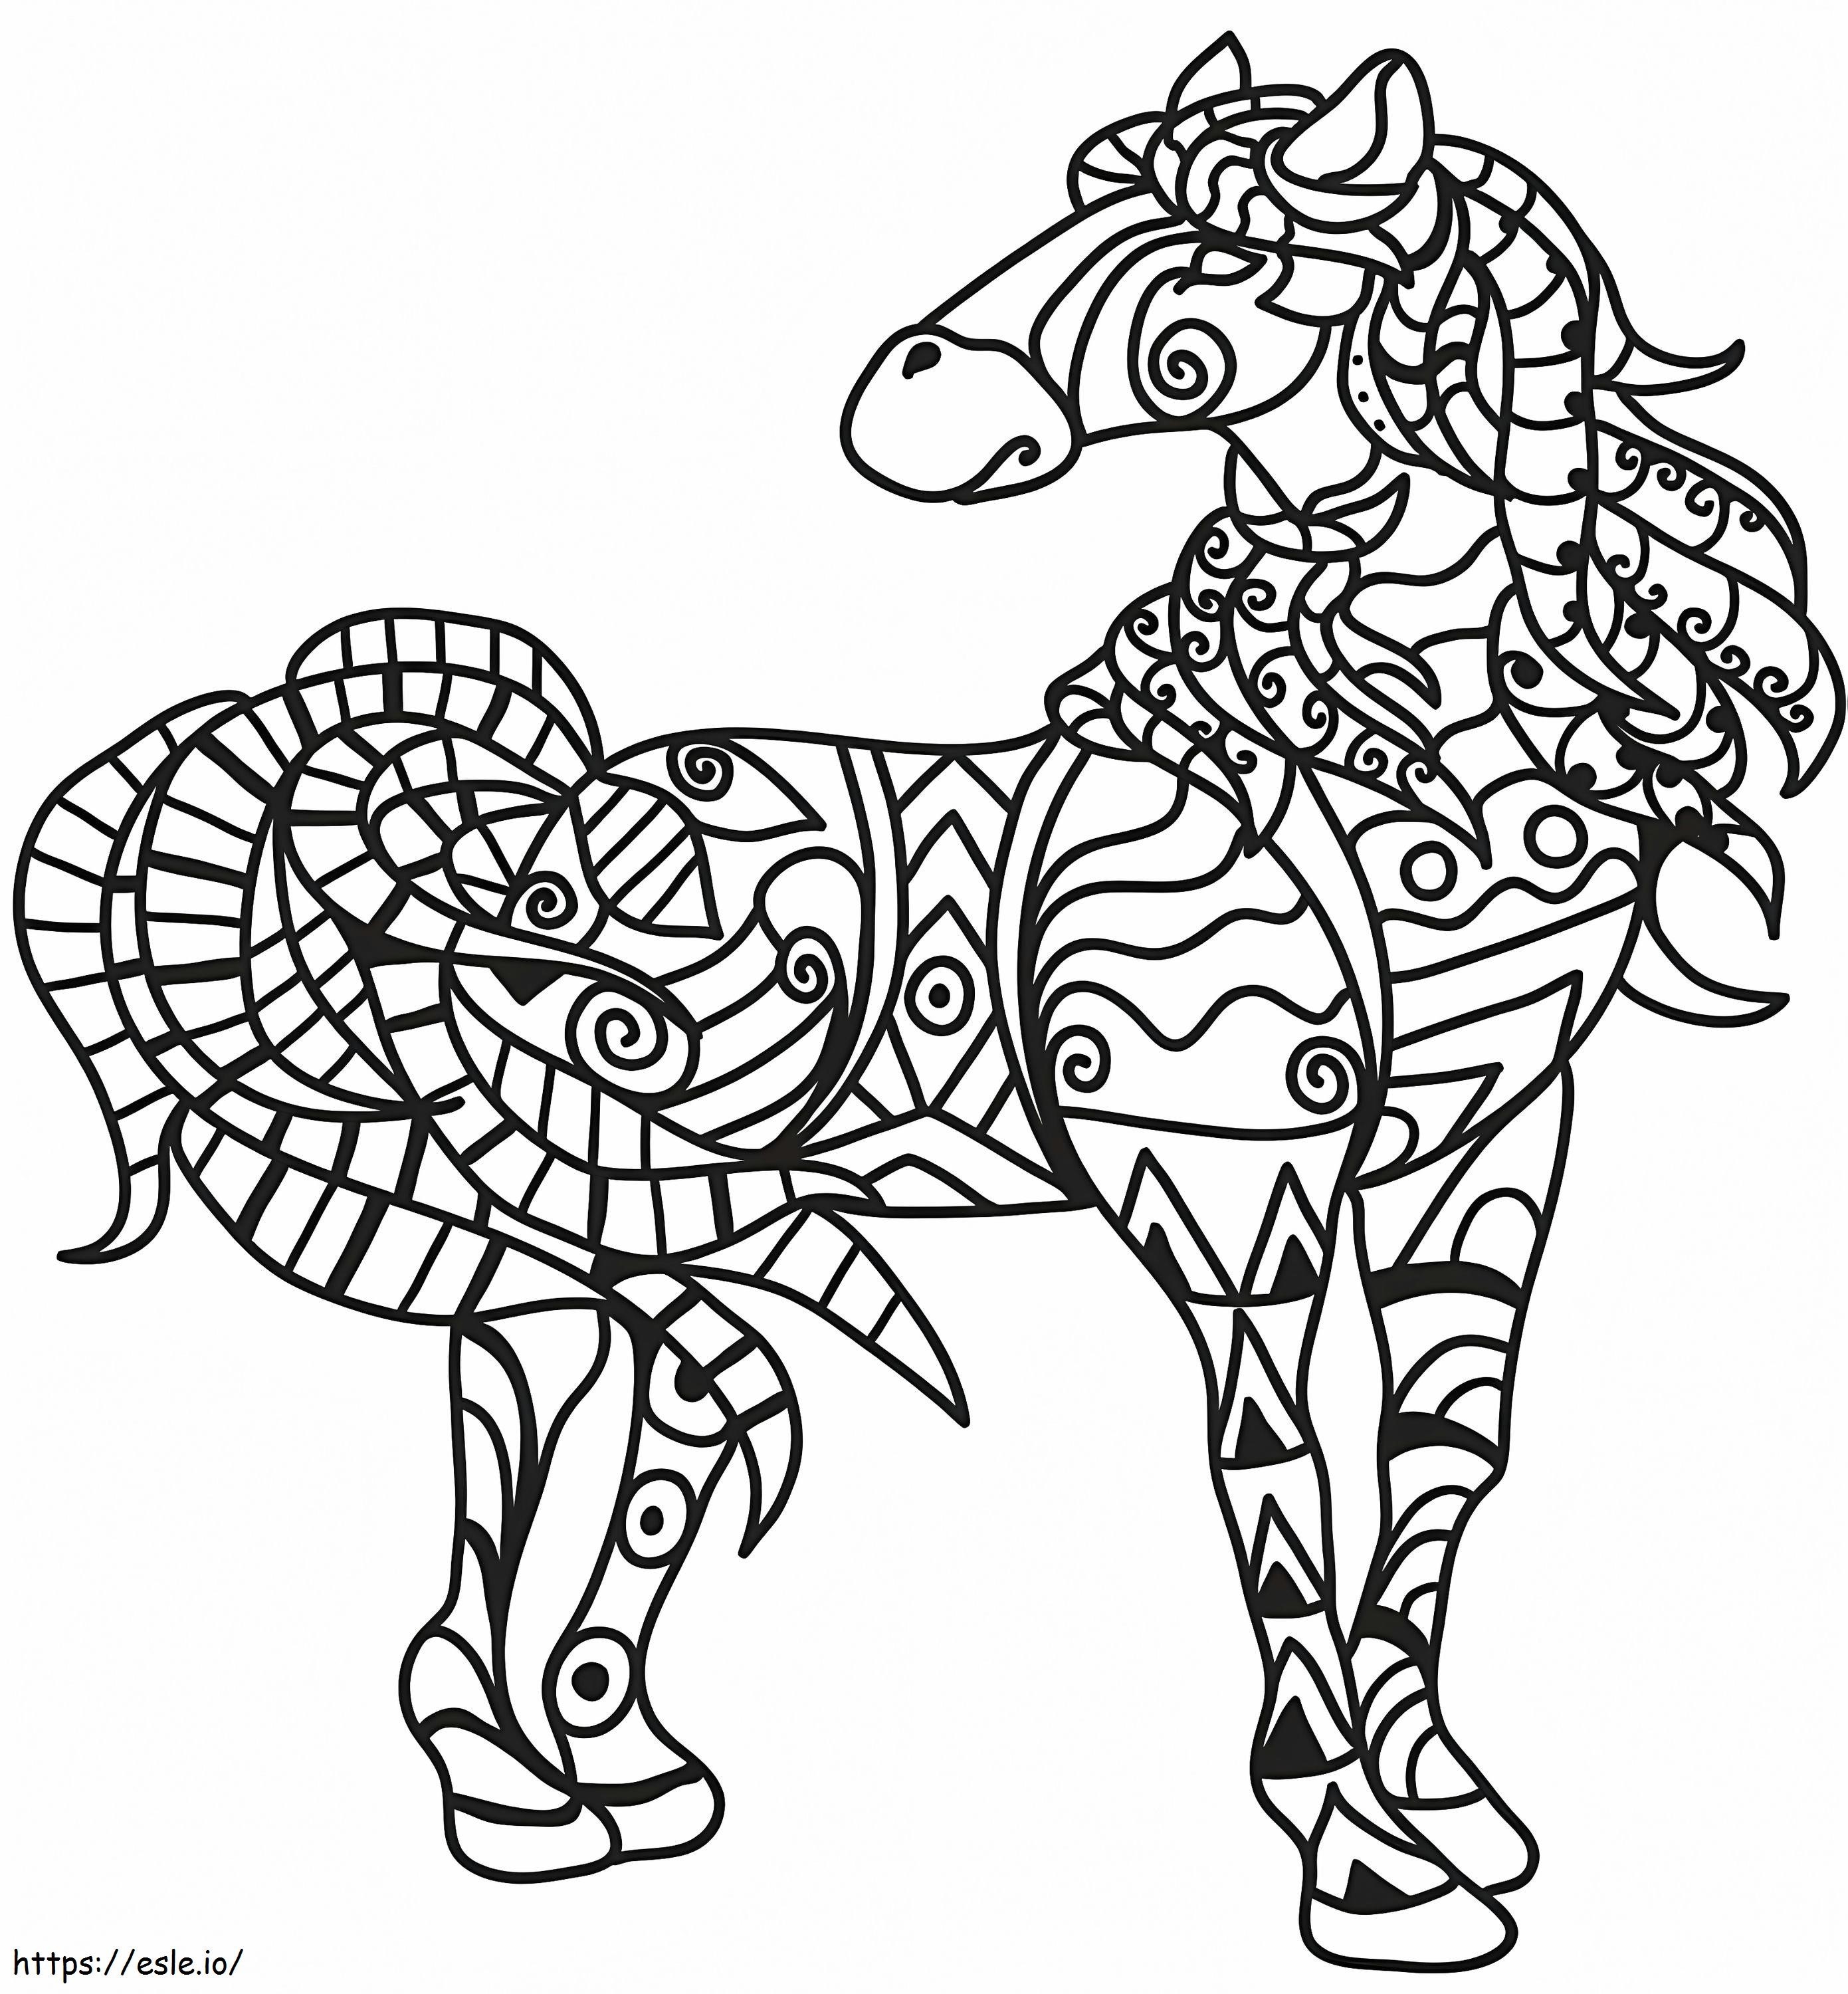 Horse Zentangle coloring page